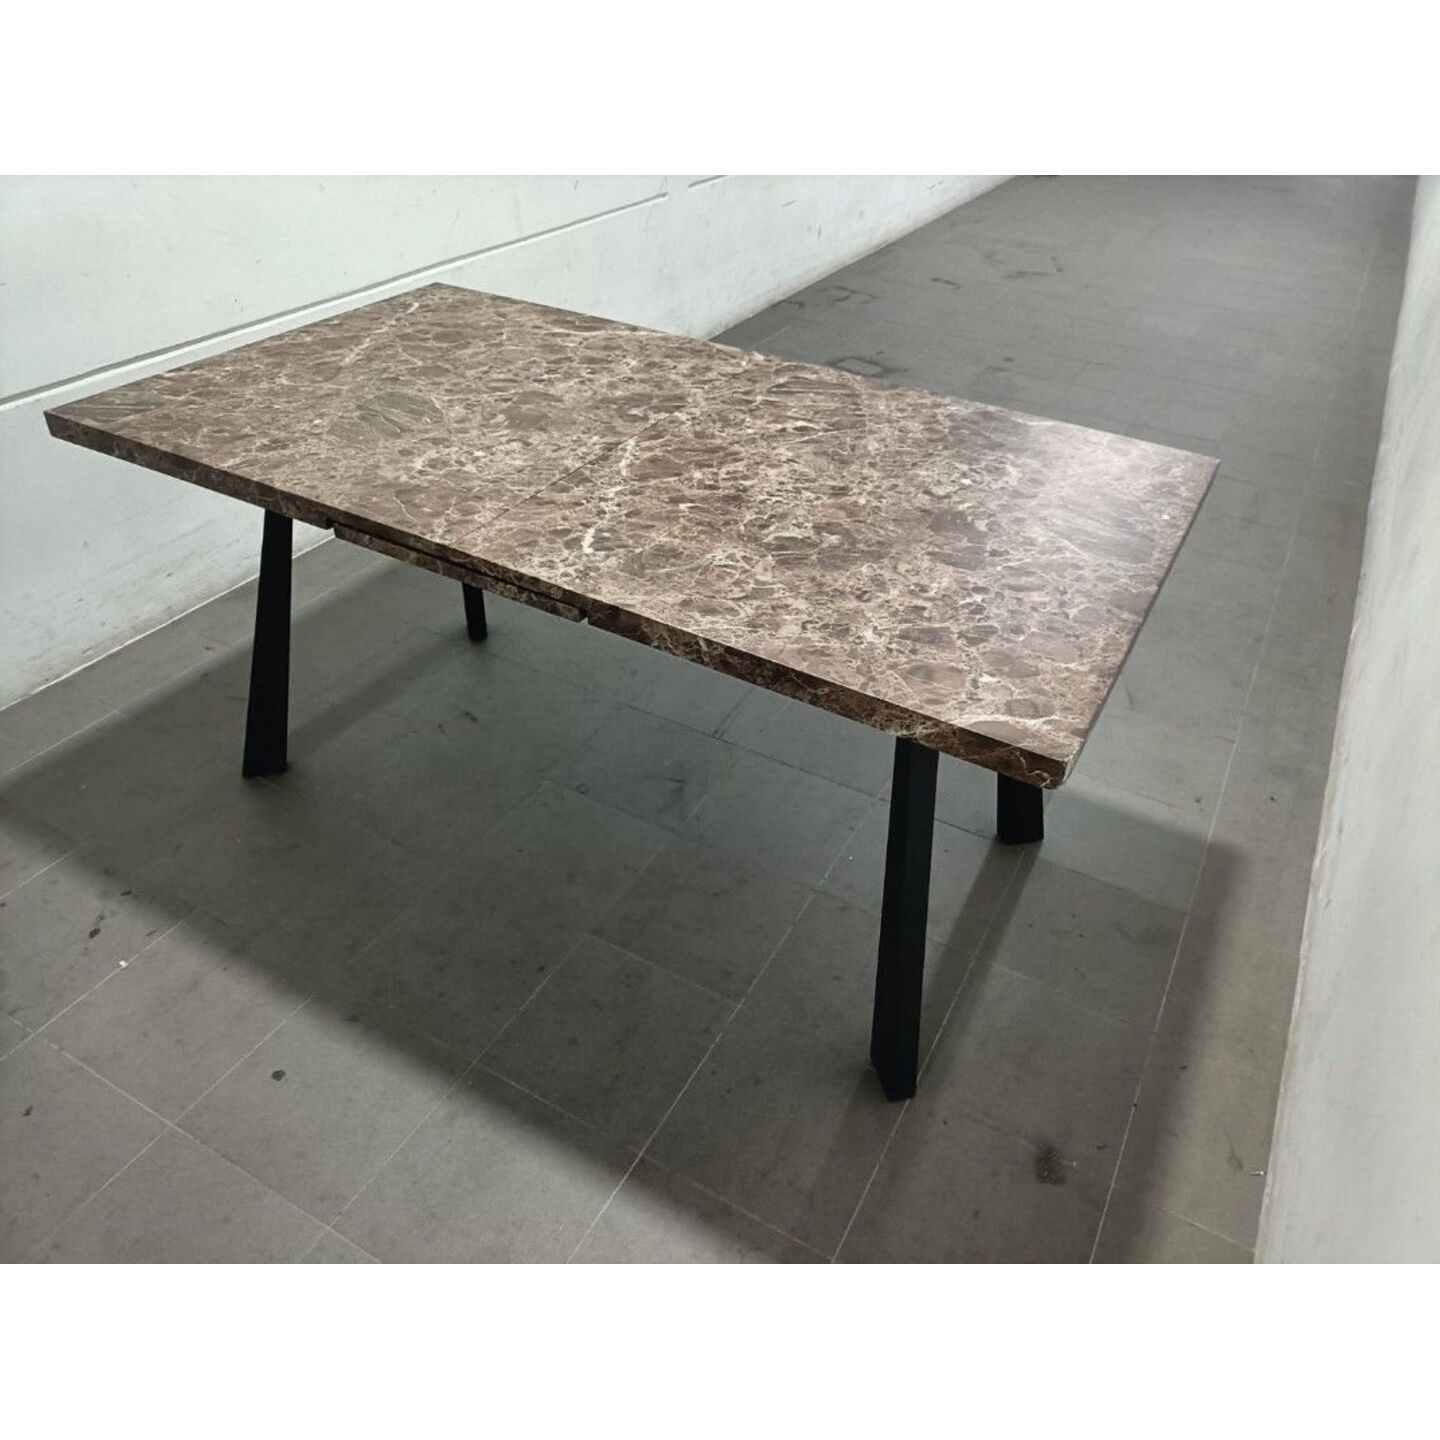 FORDA Extendable Dining Table in BROWN MARBLE LAMINATE MDF